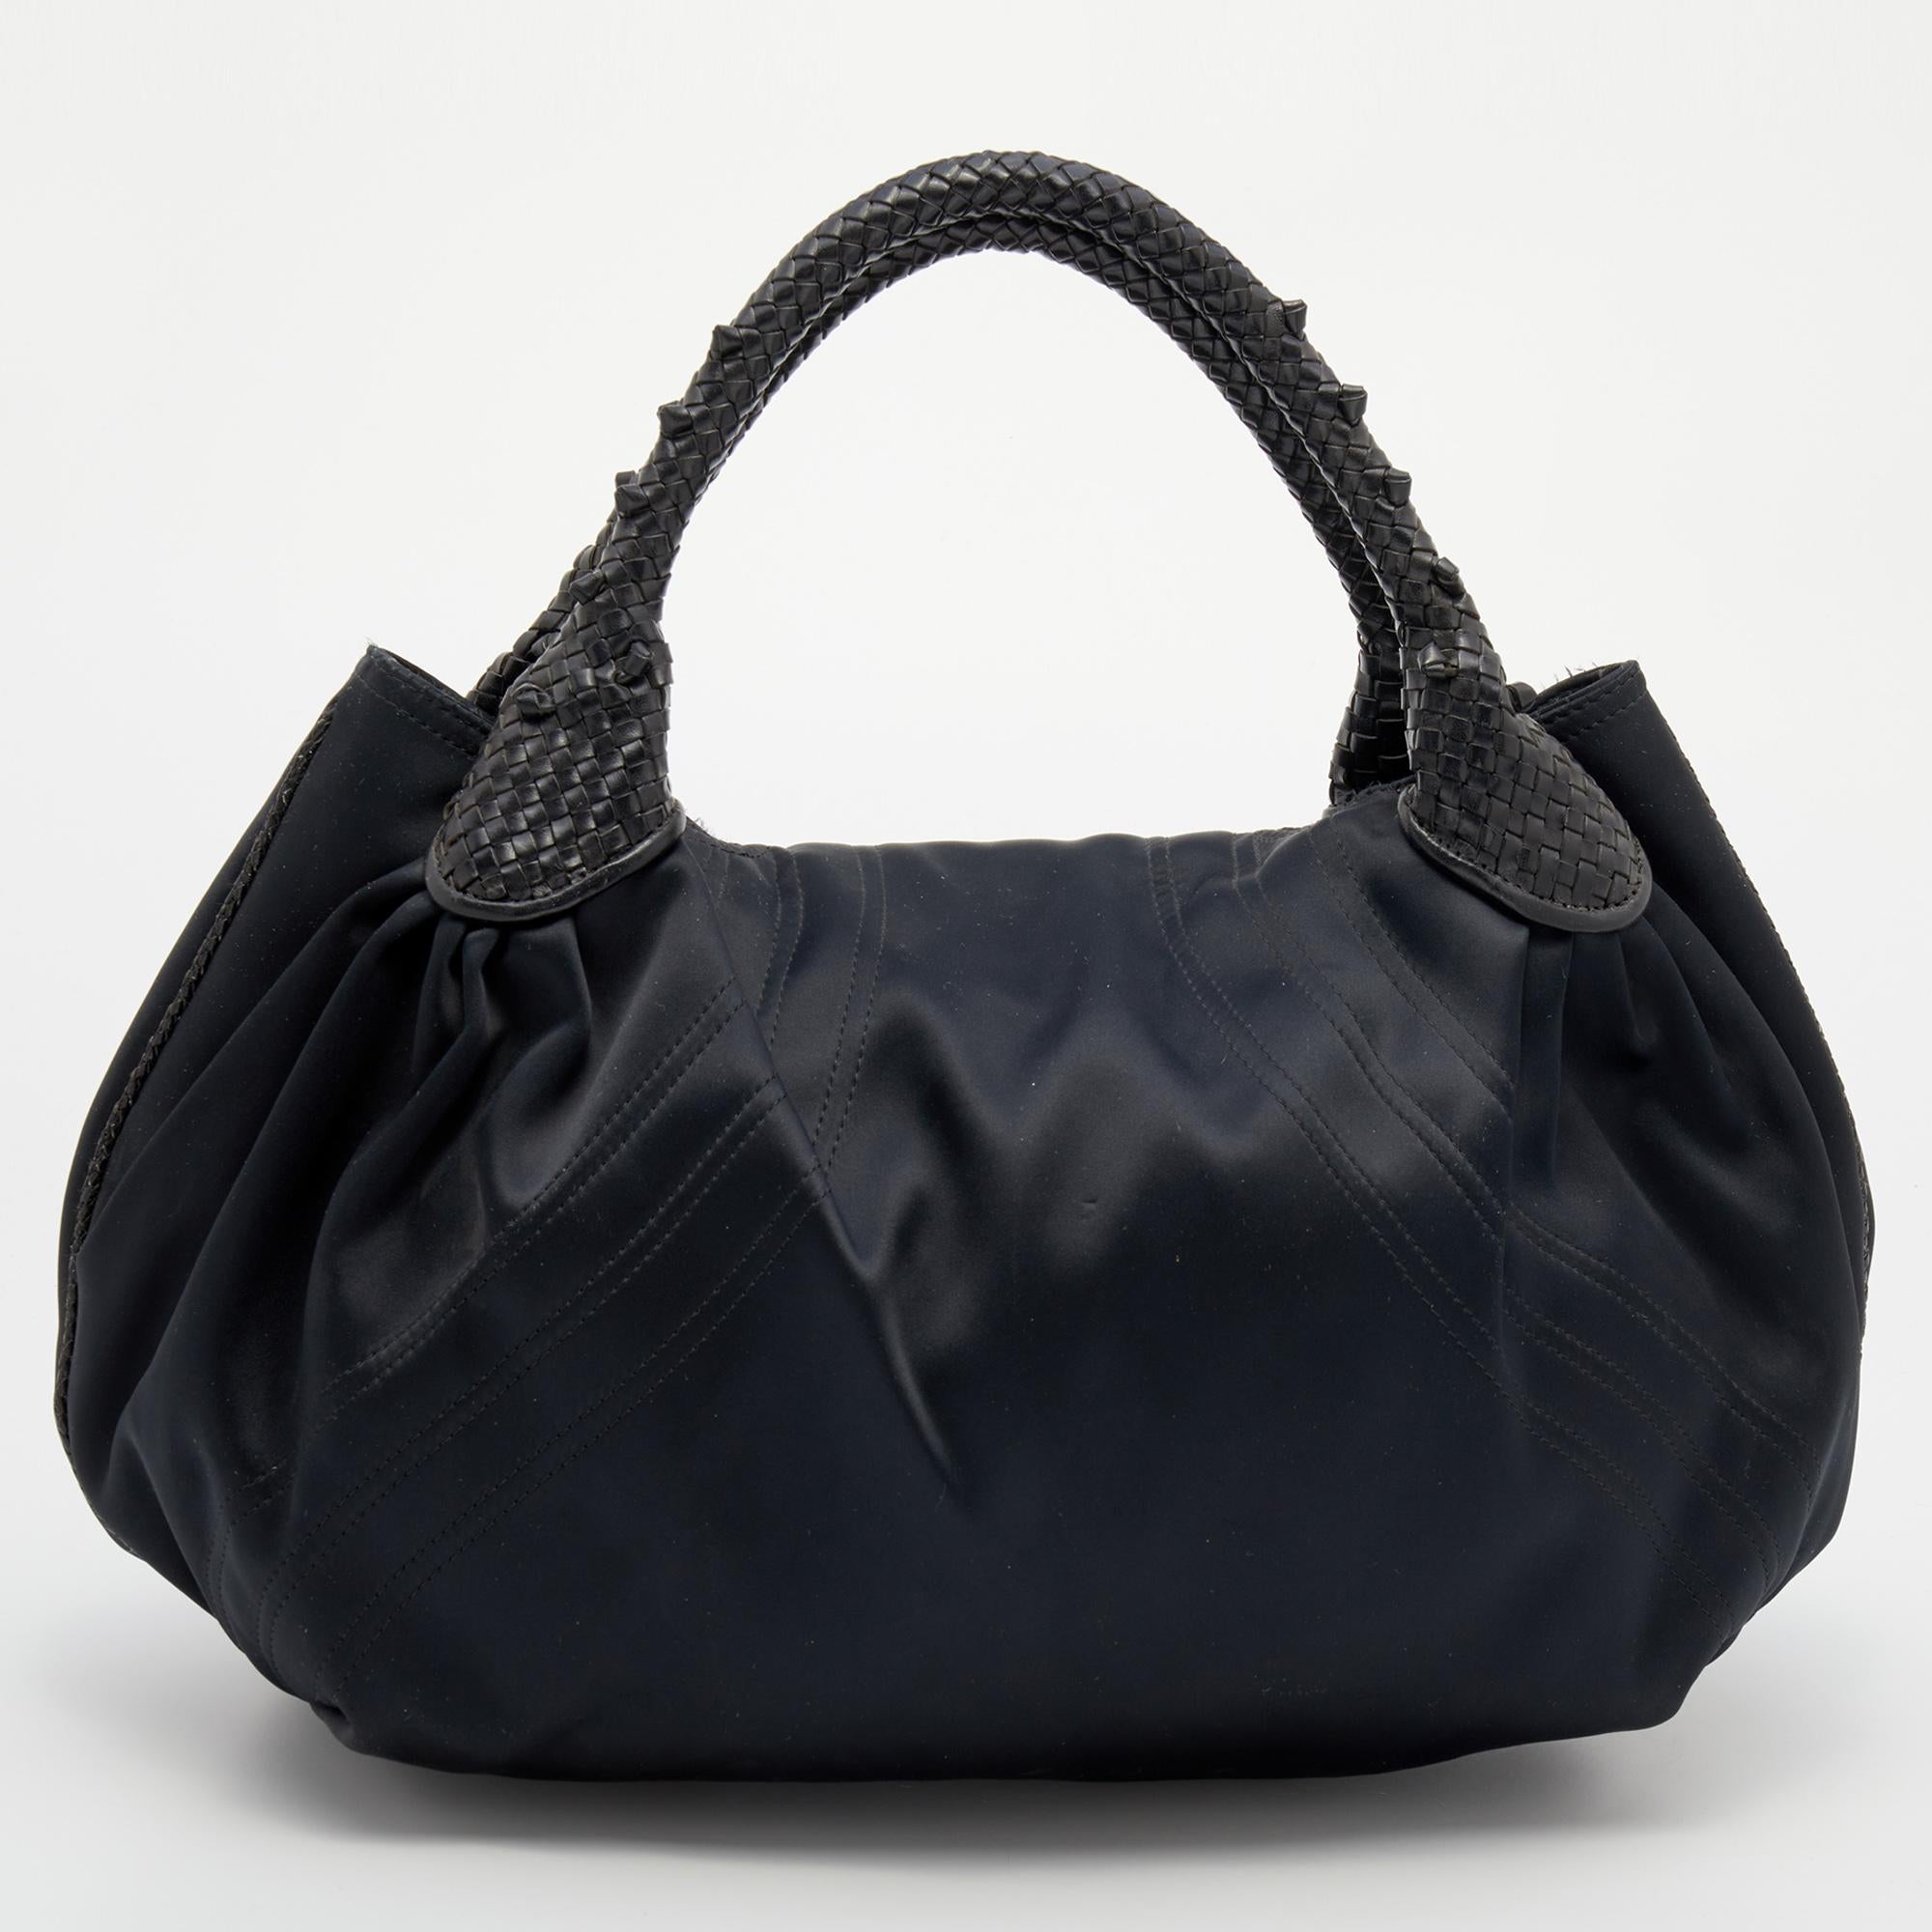 This uber-chic Spy hobo is from Fendi. It is made from black satin with leather trims and features two leather handles having a weave pattern. The front flap opens to a fabric interior that can easily fit your daily essentials. Flaunt this beauty